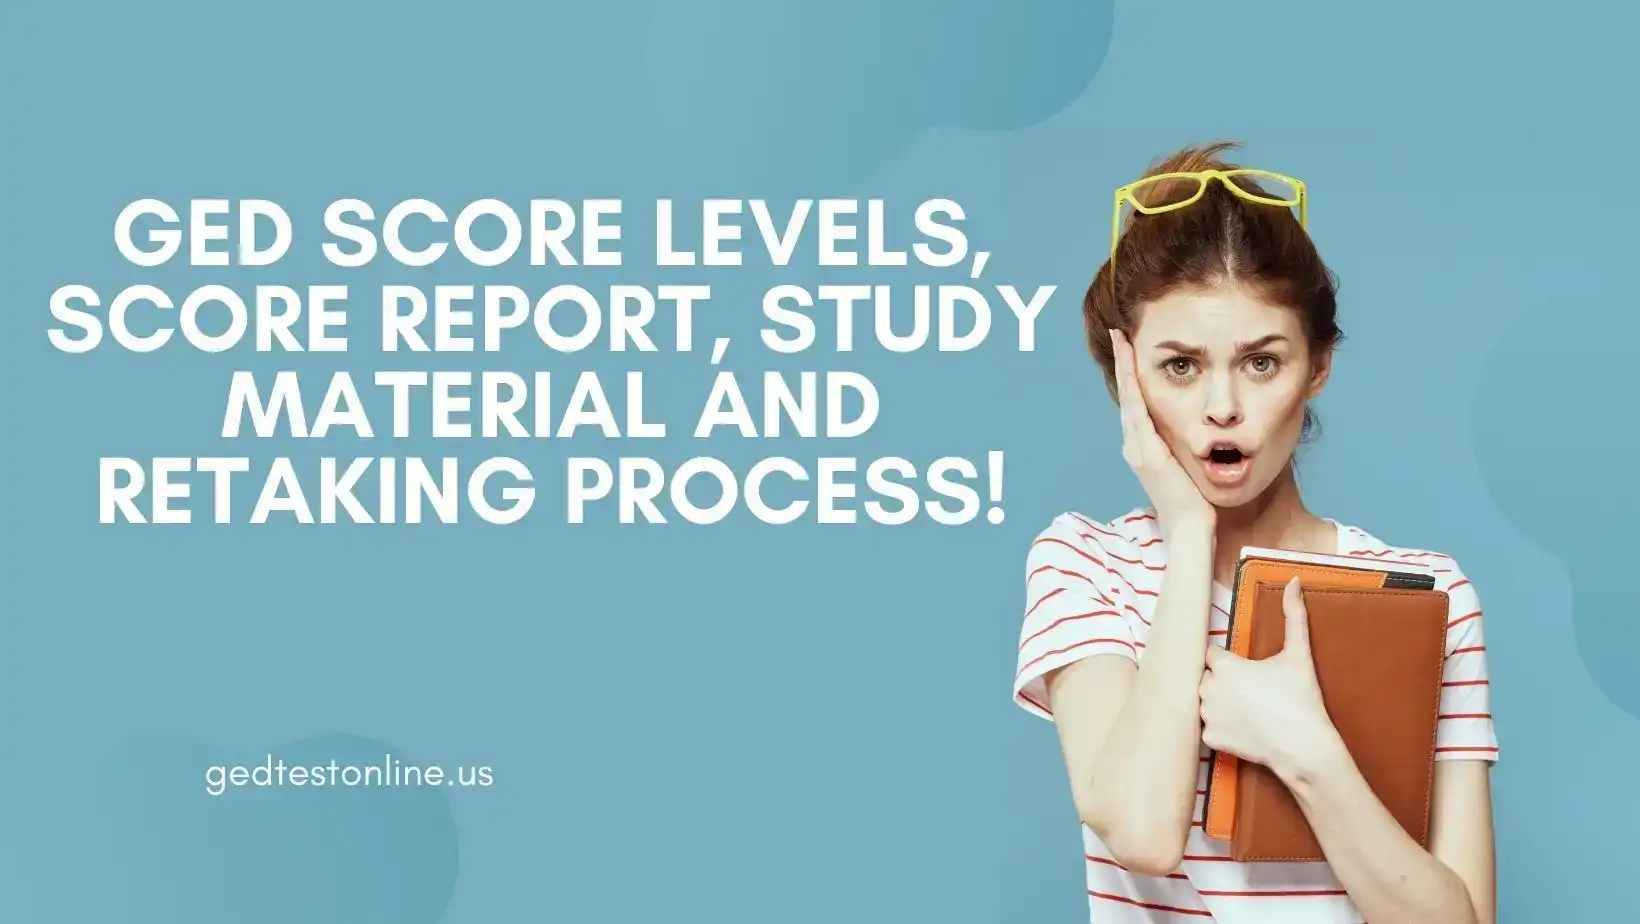 GED Score Report and Retaking: Study Material and Process